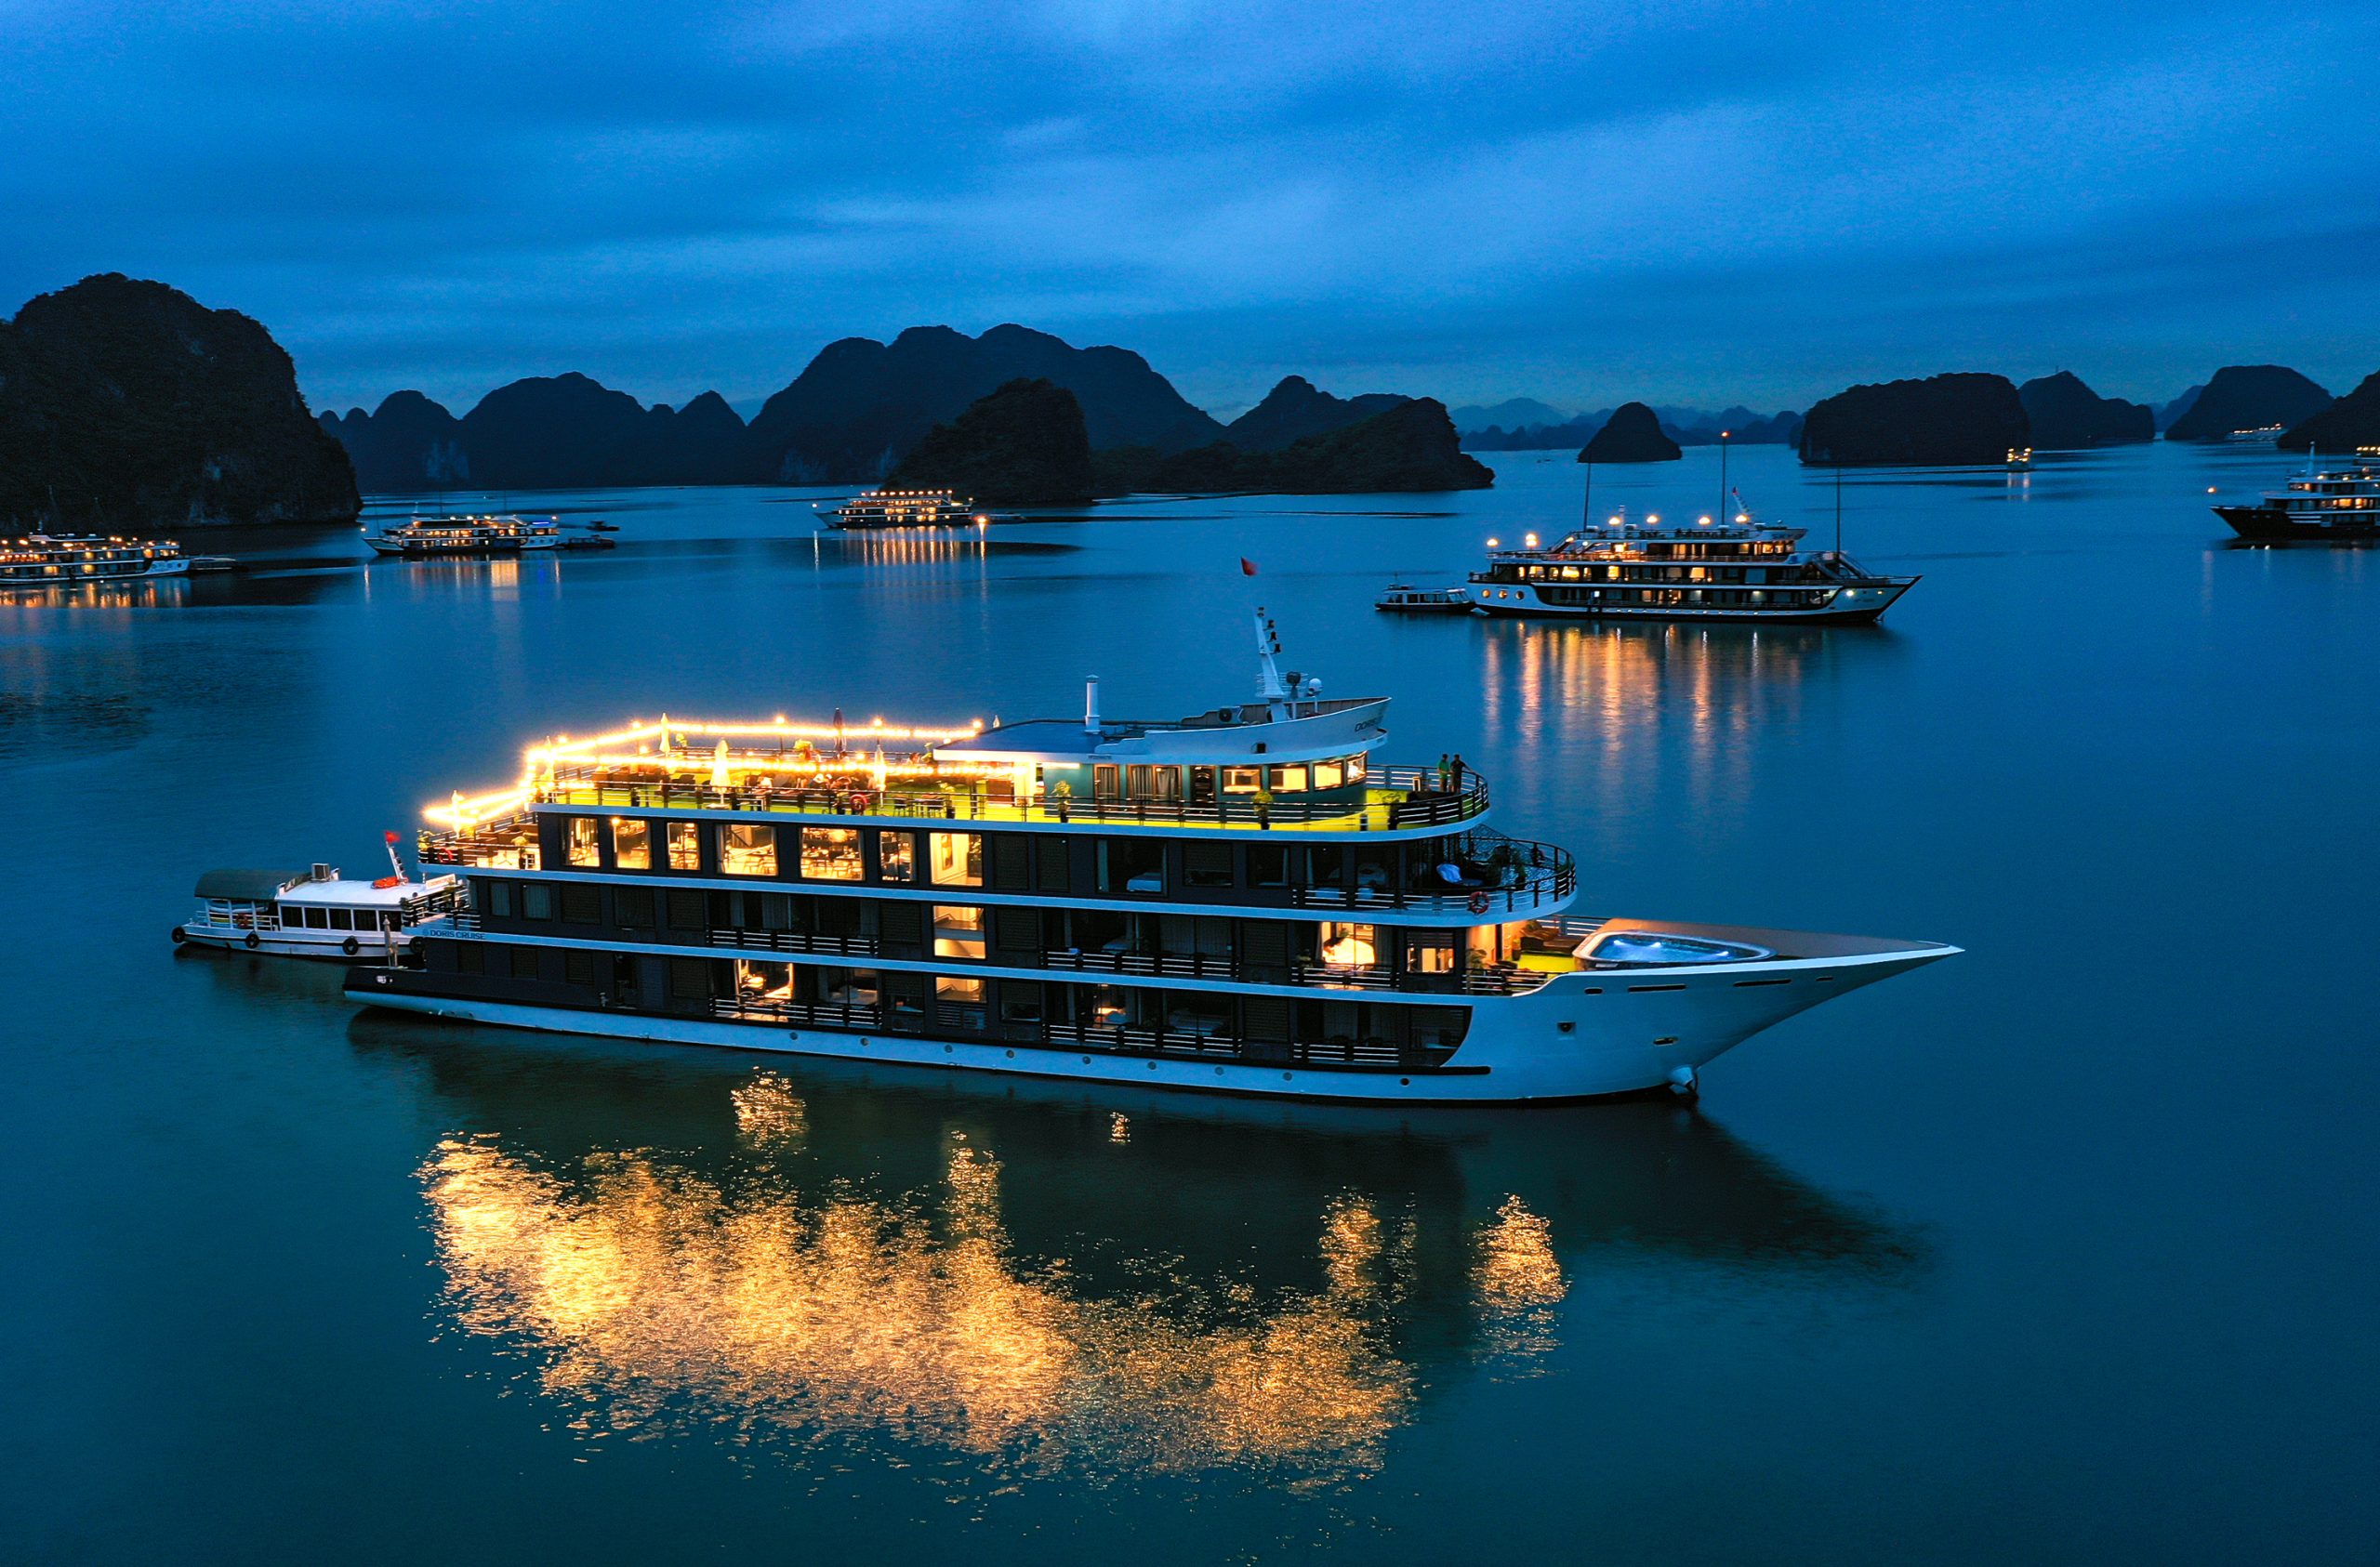 Ha Long Bay 2D1N Full Package With Doris 5* Cruise By Bus/ Limousine